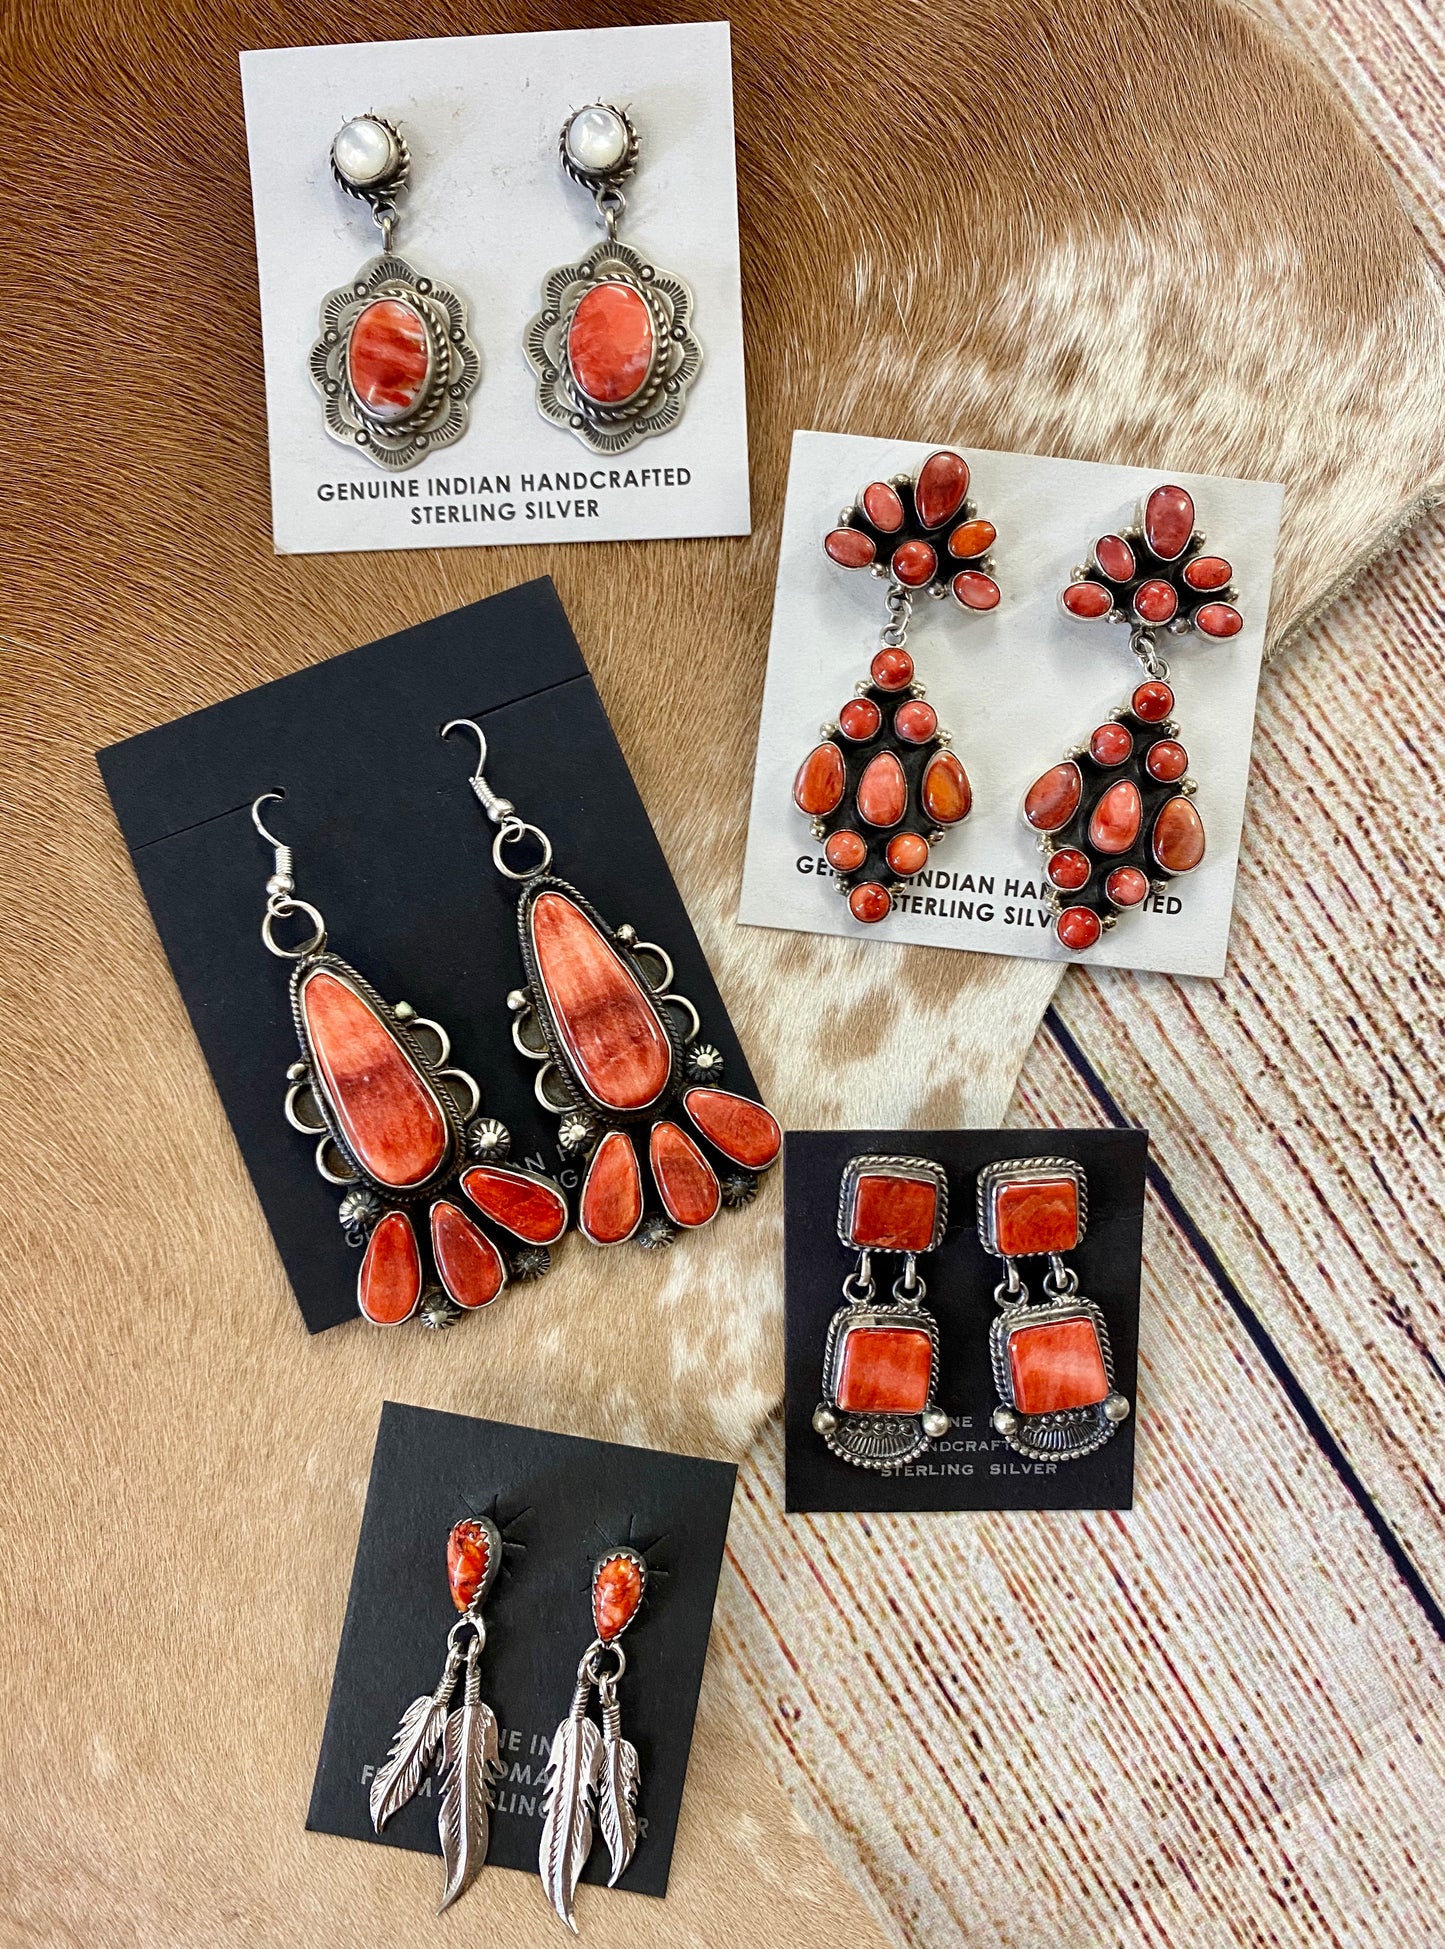 The O.A. Spiny Oyster Earrings - Ny Texas Style Boutique Red orange Spiny Oyster post sterling silver earrings. Stamped sterling and signed by Native American artist silversmith Oscar Alexius on the back. The perfect pop of color for any outfit!   Size: 1.25” Inches Length   Stone: Spiny Oyster  Singed: YES "O.A."   Hallmark/Artist: Oscar Alexius 